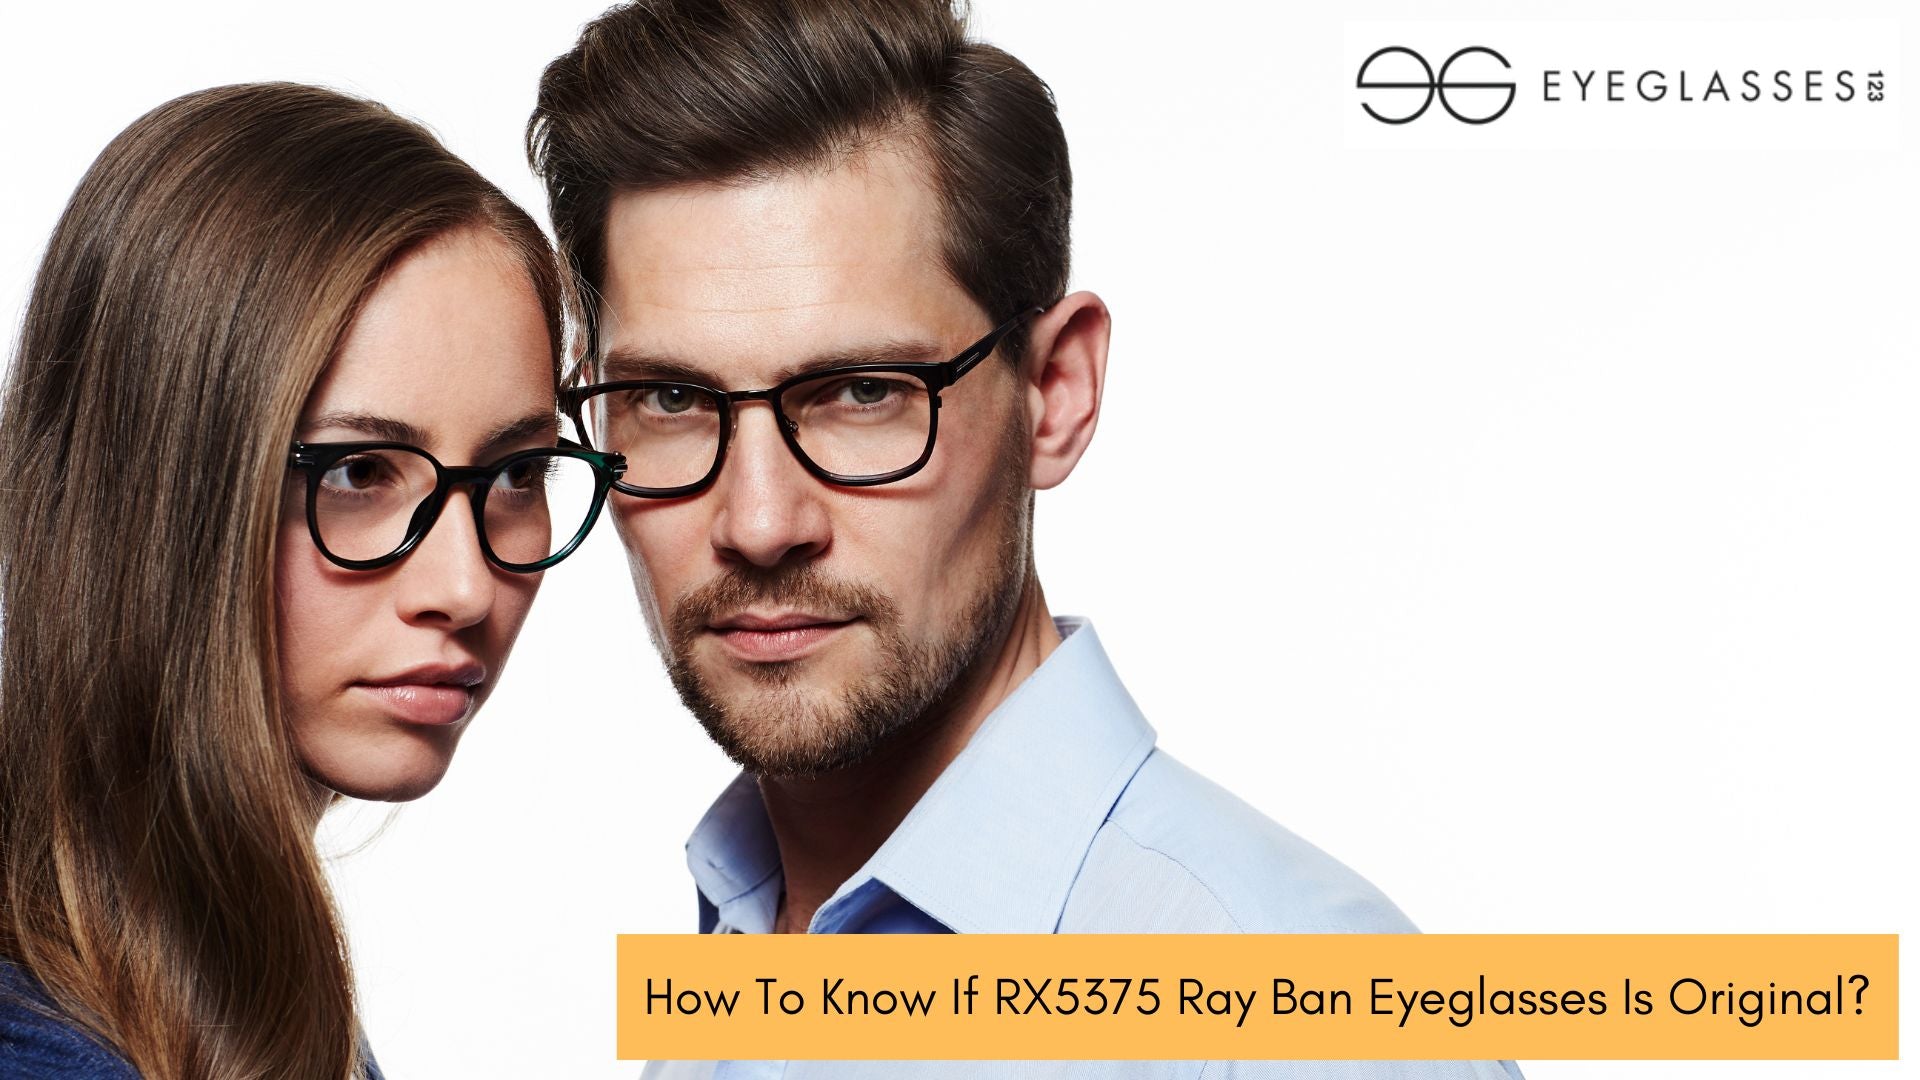 How To Know If RX5375 Ray Ban Eyeglasses Is Original?